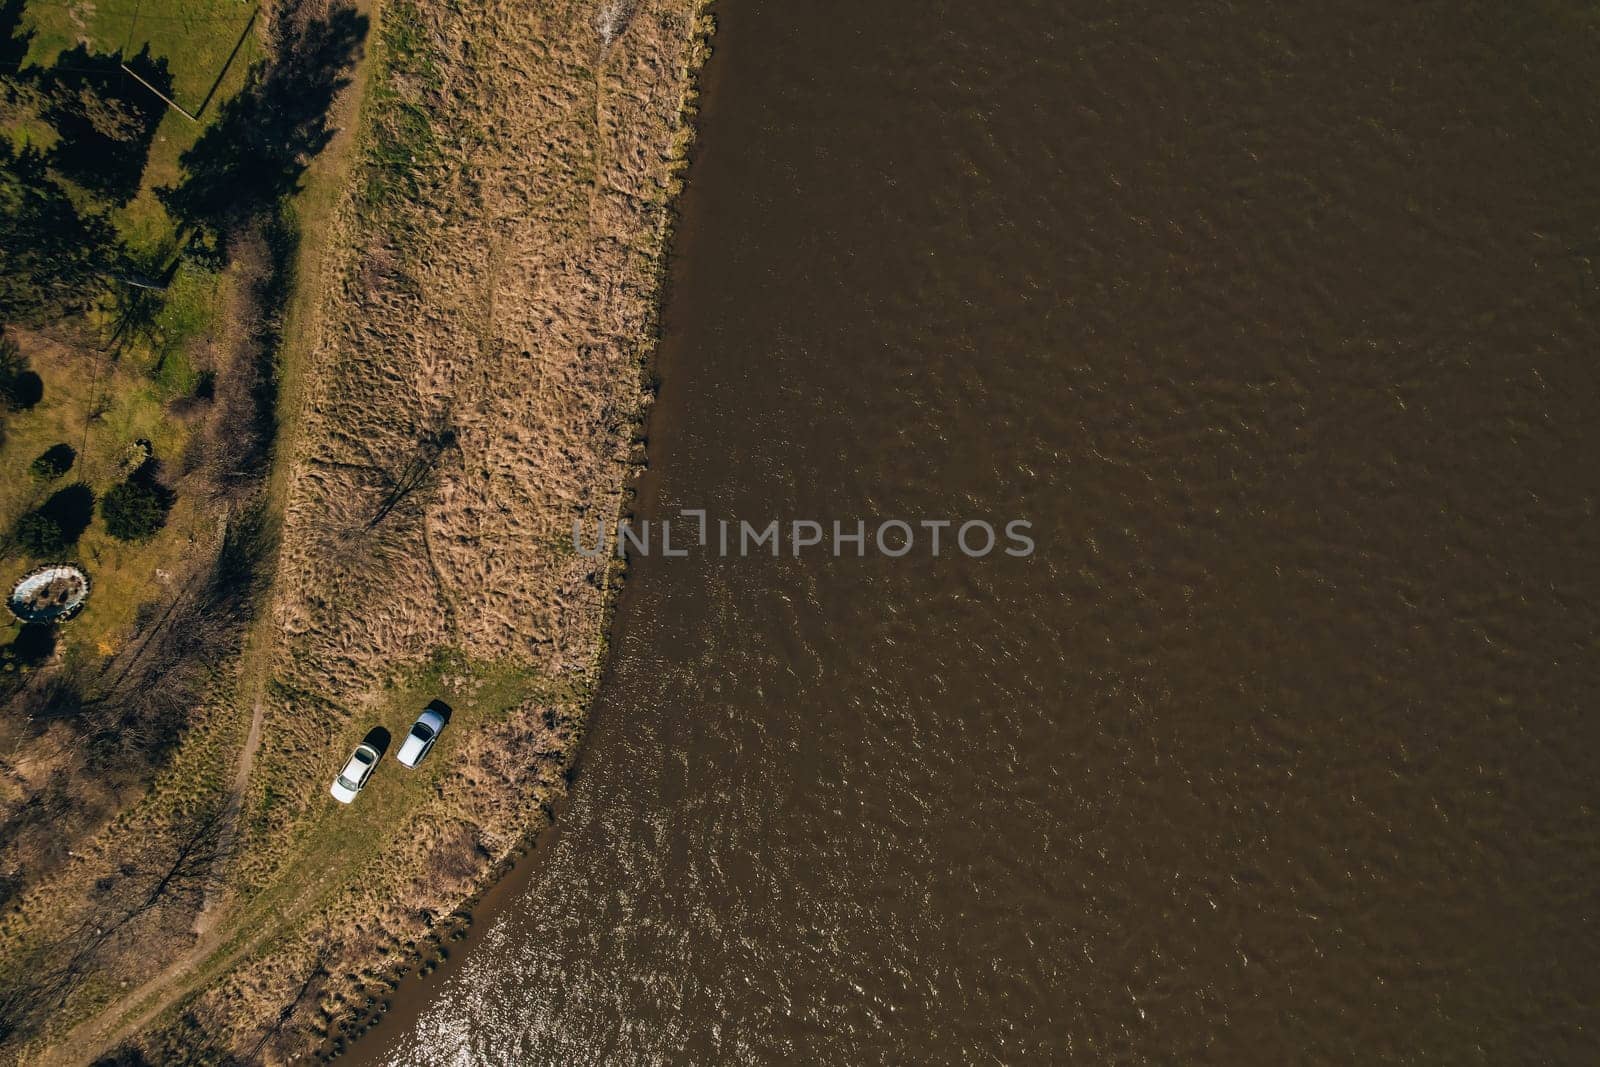 Aerial view drone of two cars on bank river. Concept of Outdoor activity spending time in unity with nature. Getting away. Local travel